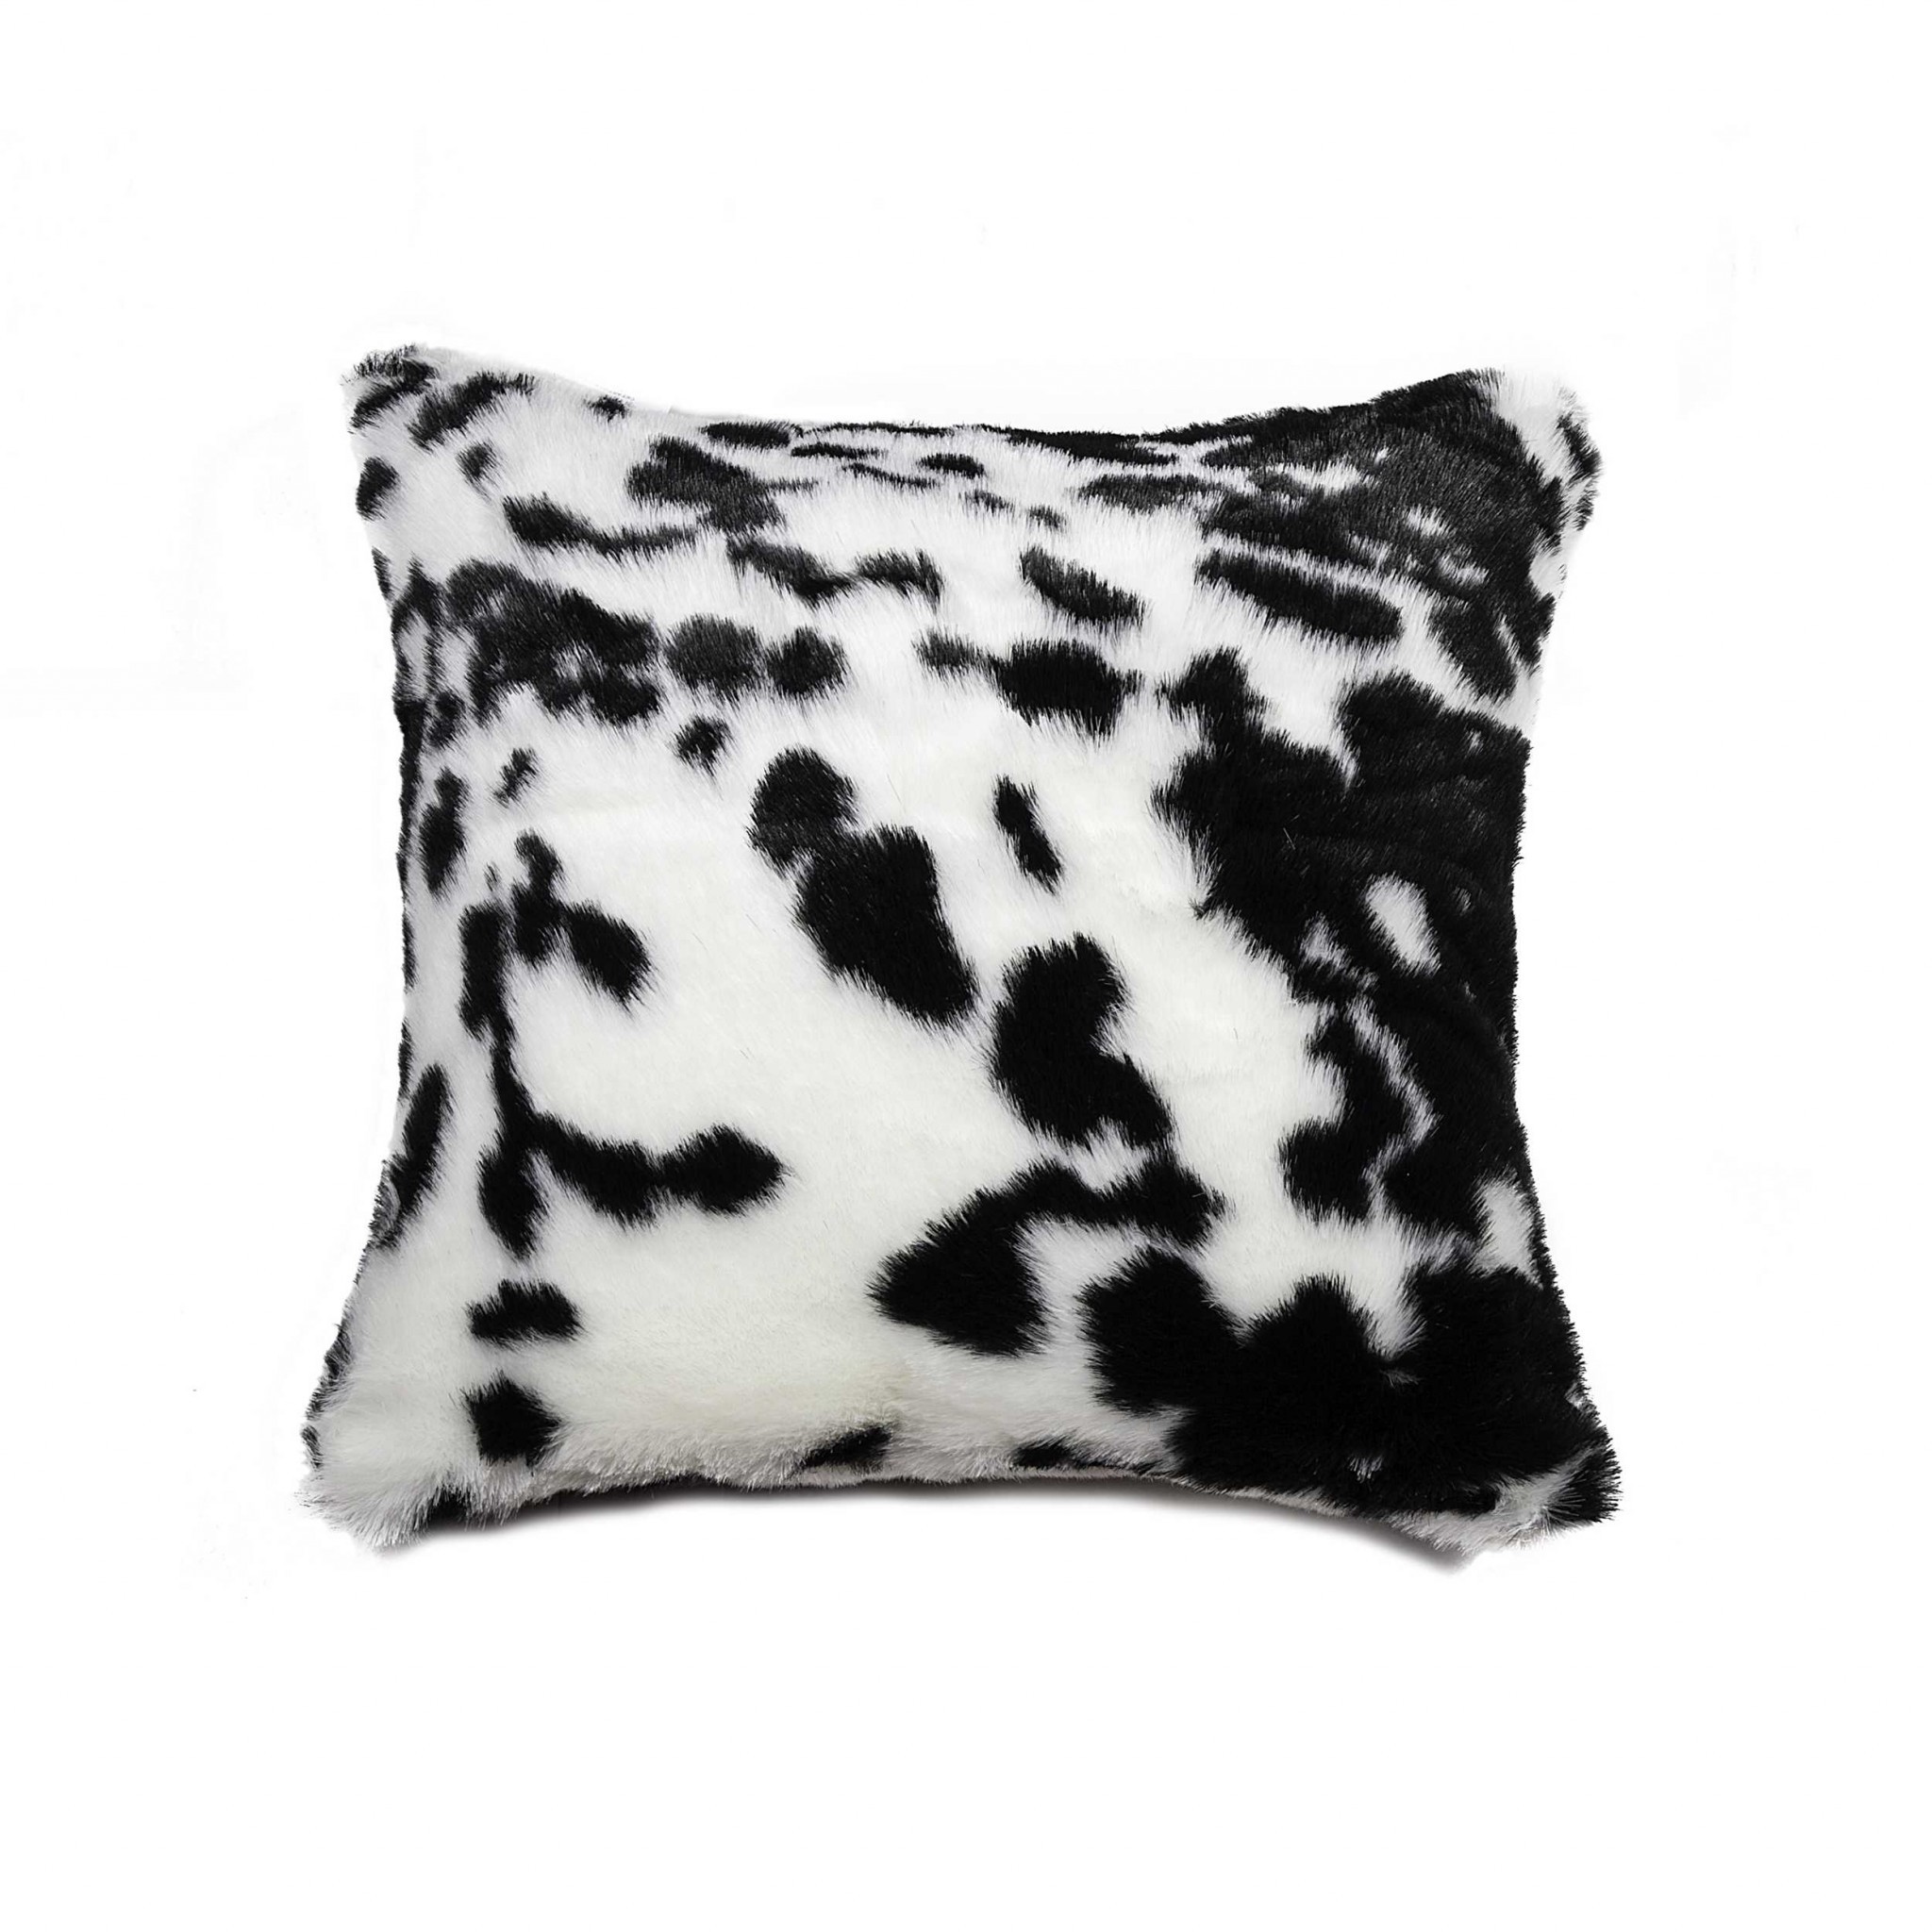 18" x 18" x 5" Sugarland Black And White Faux Fur - Pillow